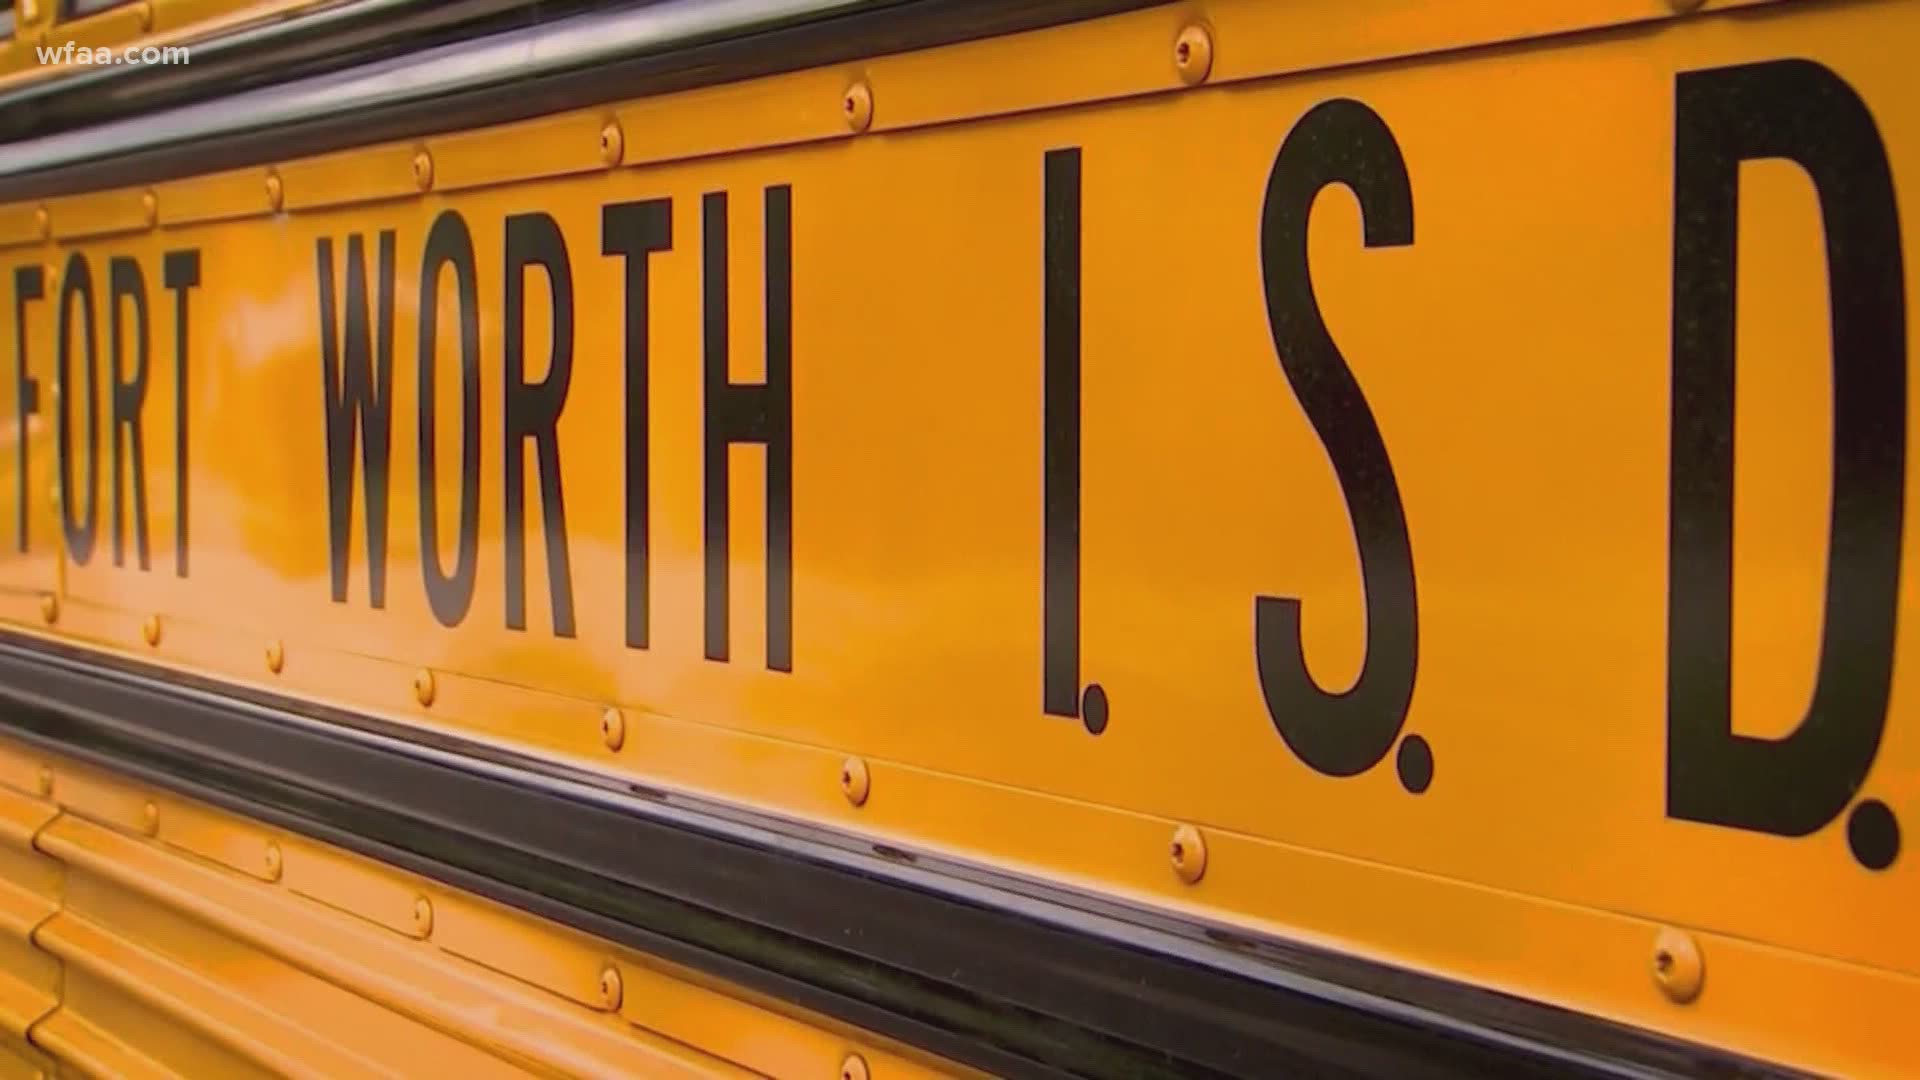 The Fort Worth ISD school board voted to push back their start date and begin classes virtually.